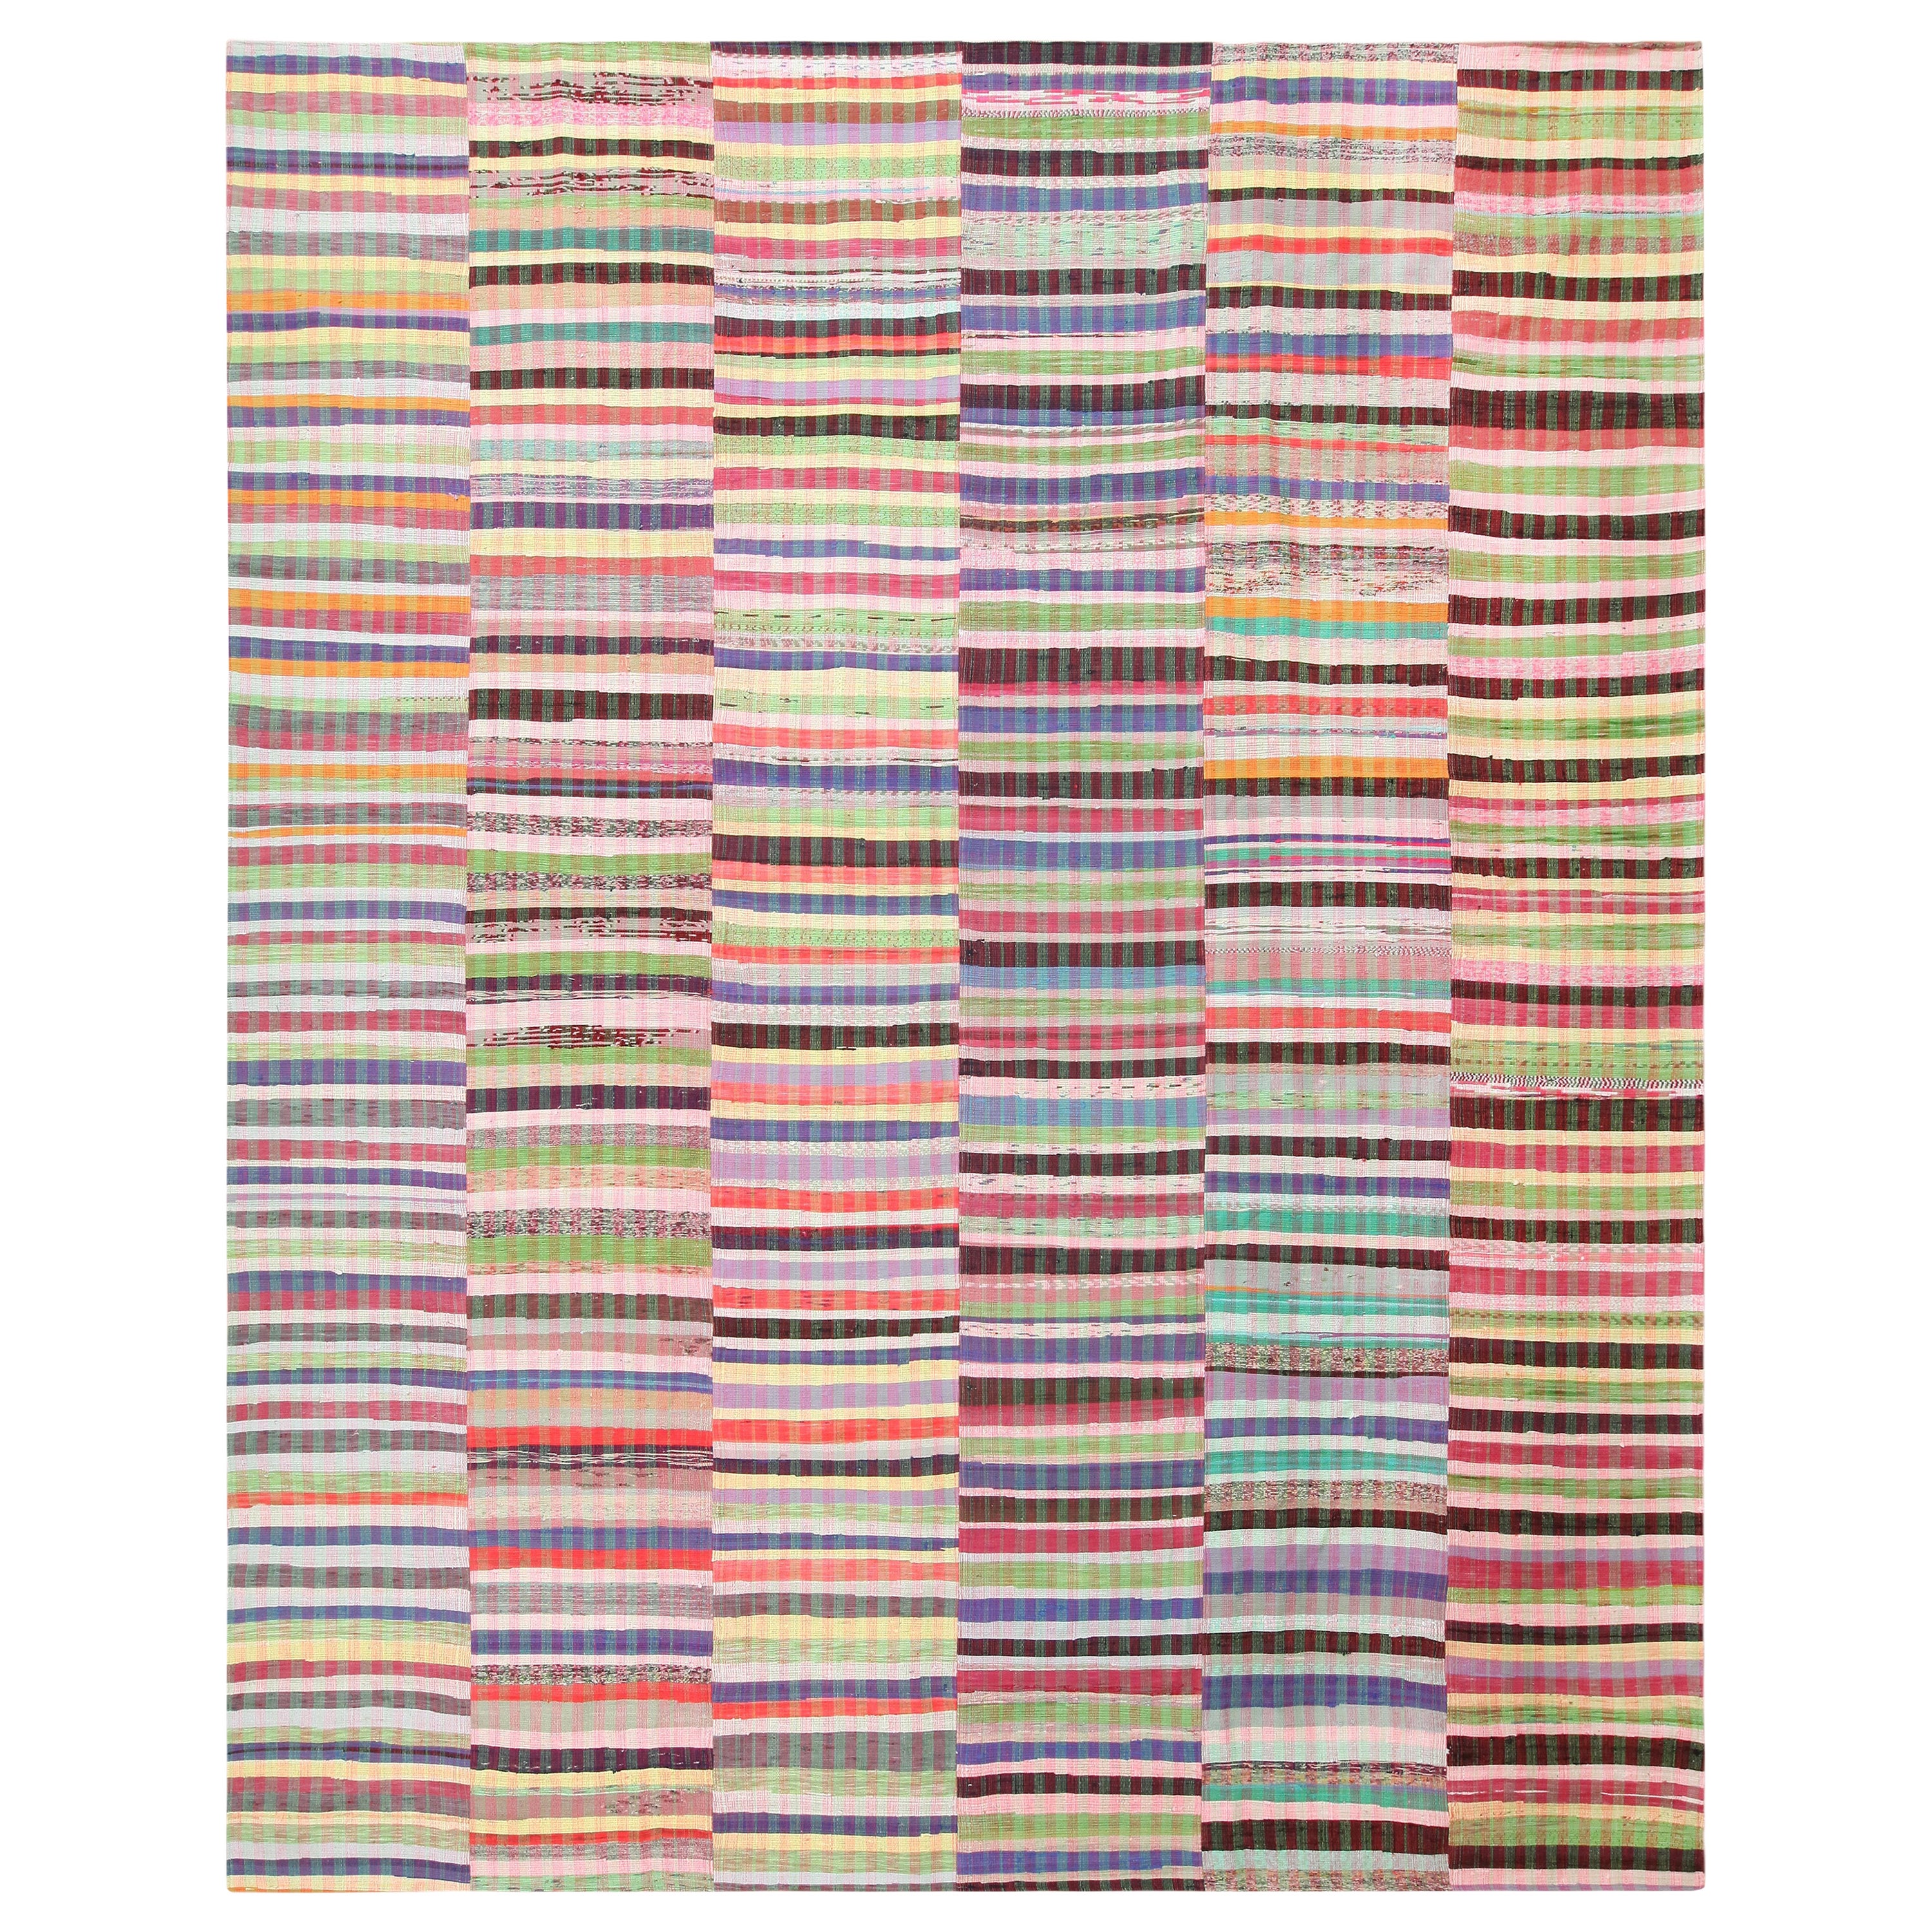 Nazmiyal Collection Rainbow Colors Striped Modern Rag Rug. 12 ft x 15 ft